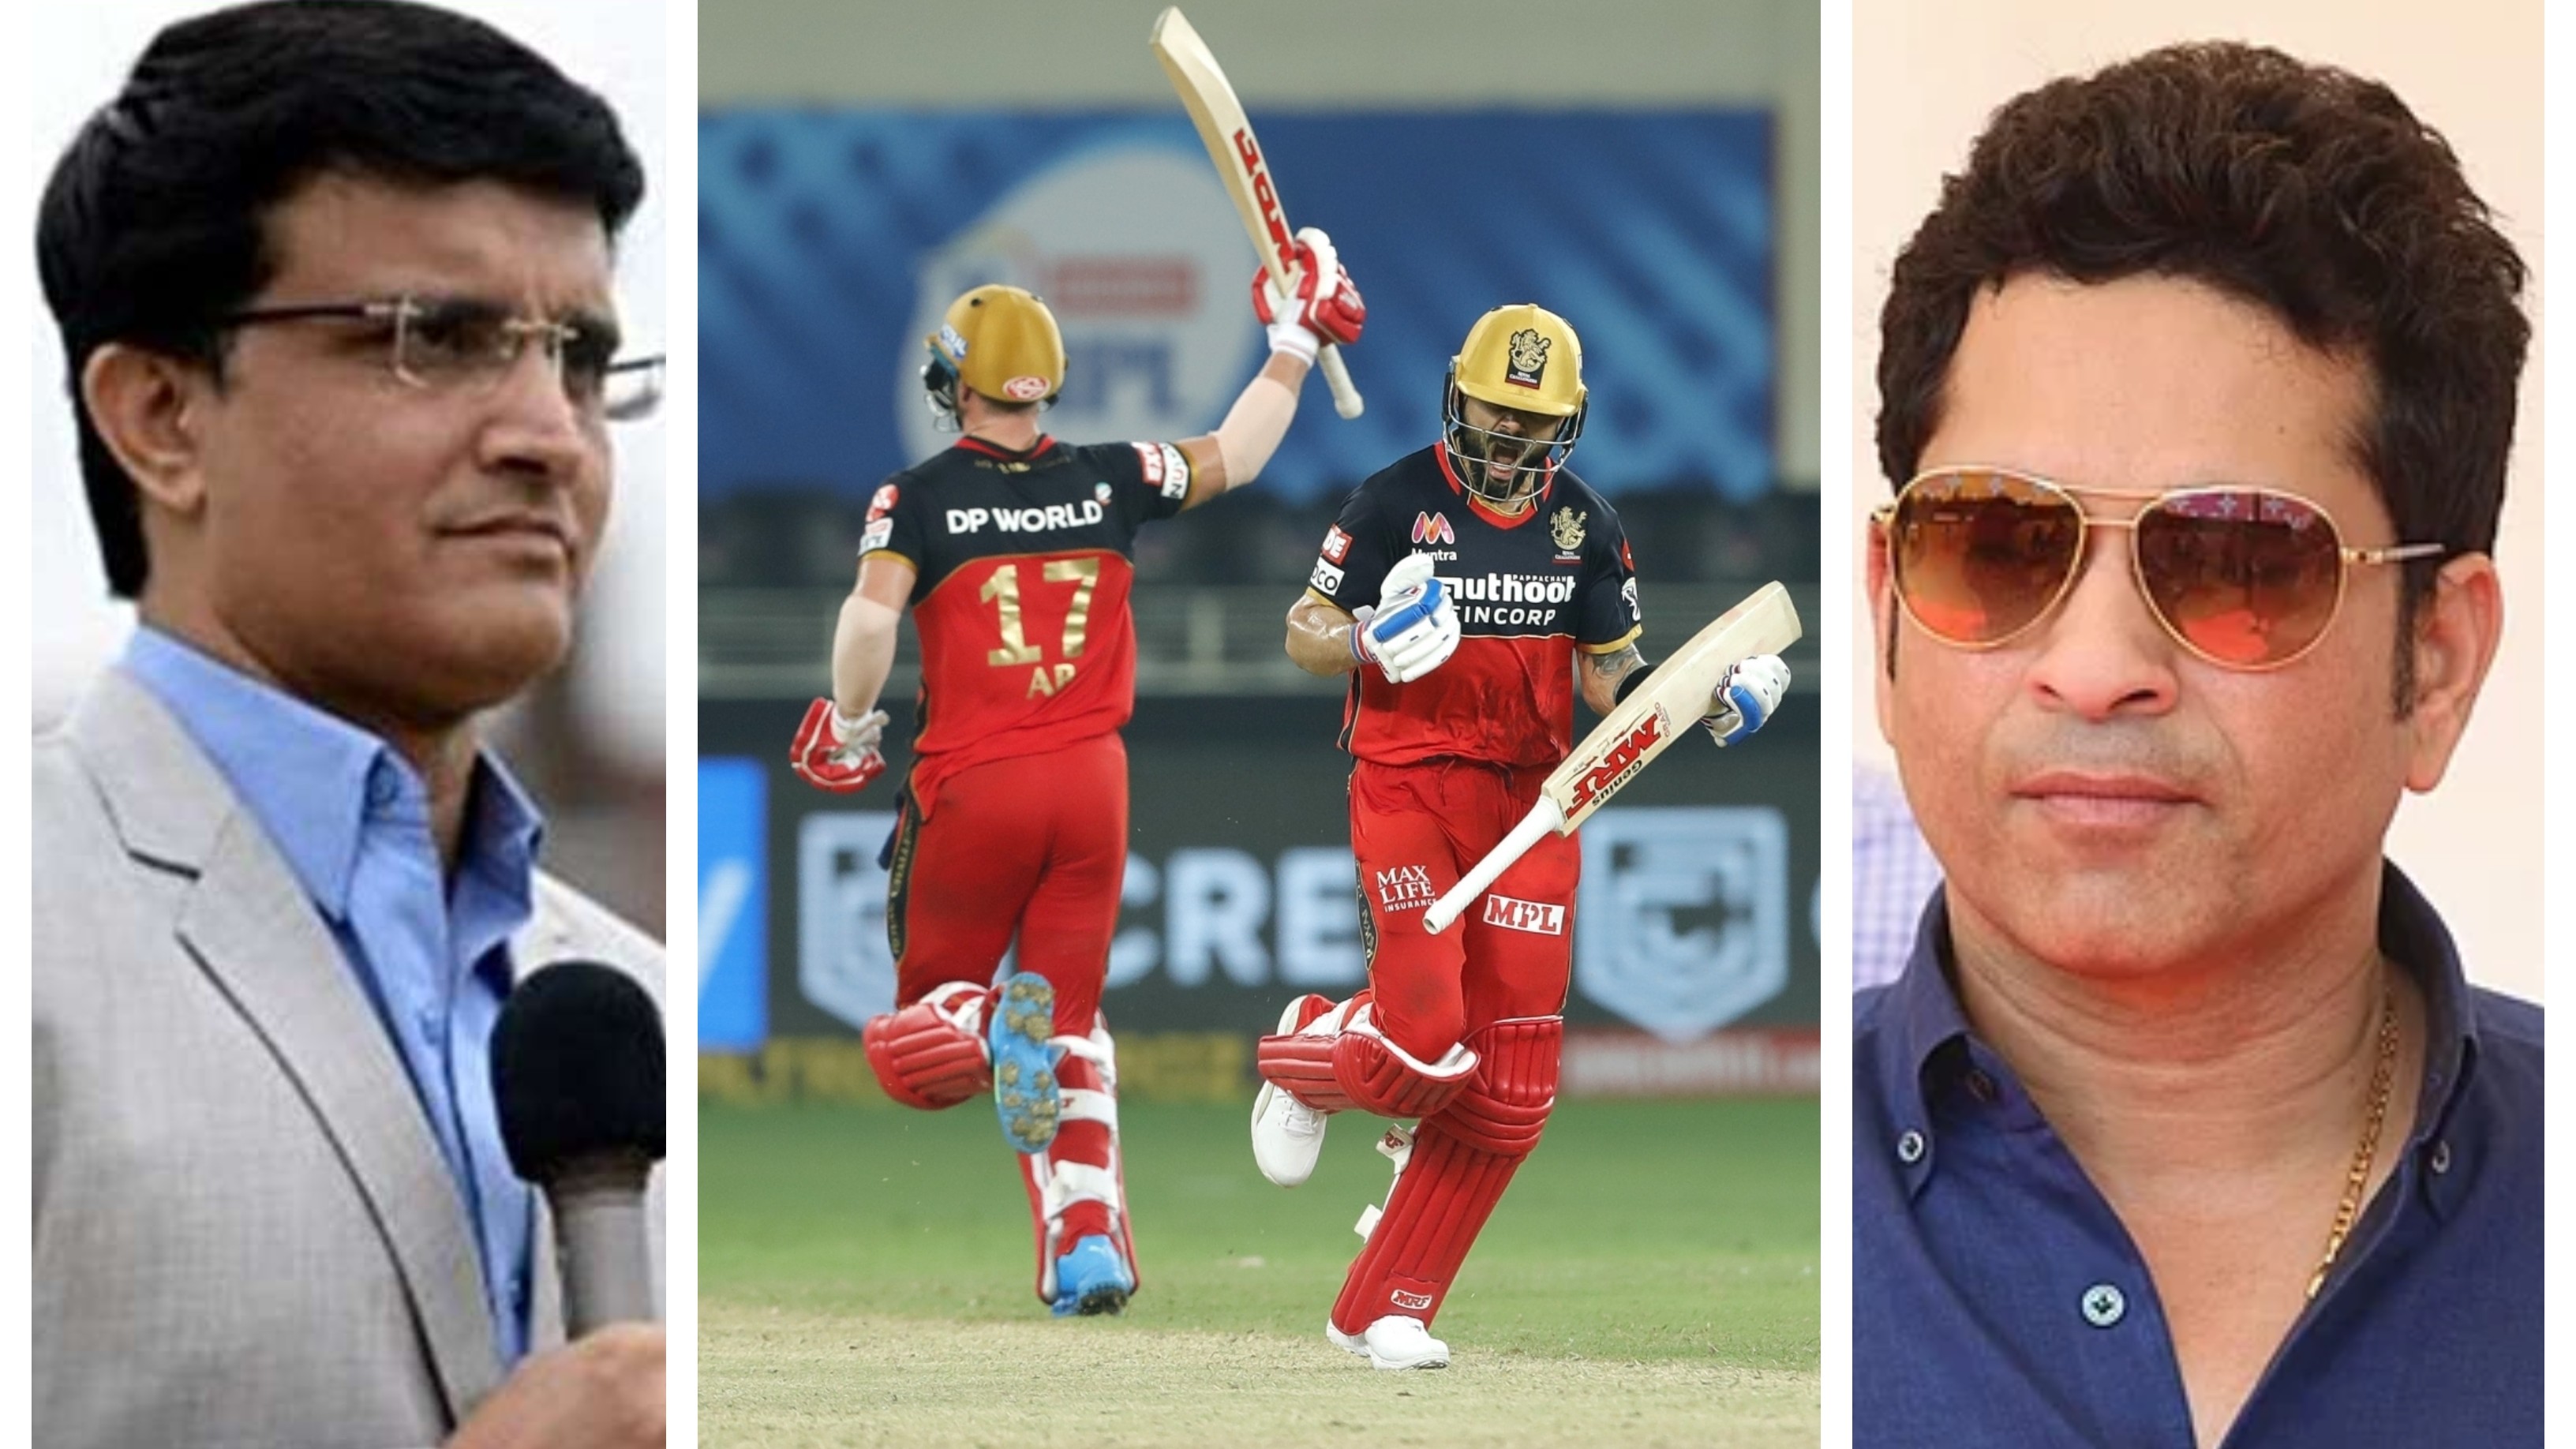 IPL 2020: RCB v MI – Cricket fraternity reacts as IPL produces another Super-Over finish 